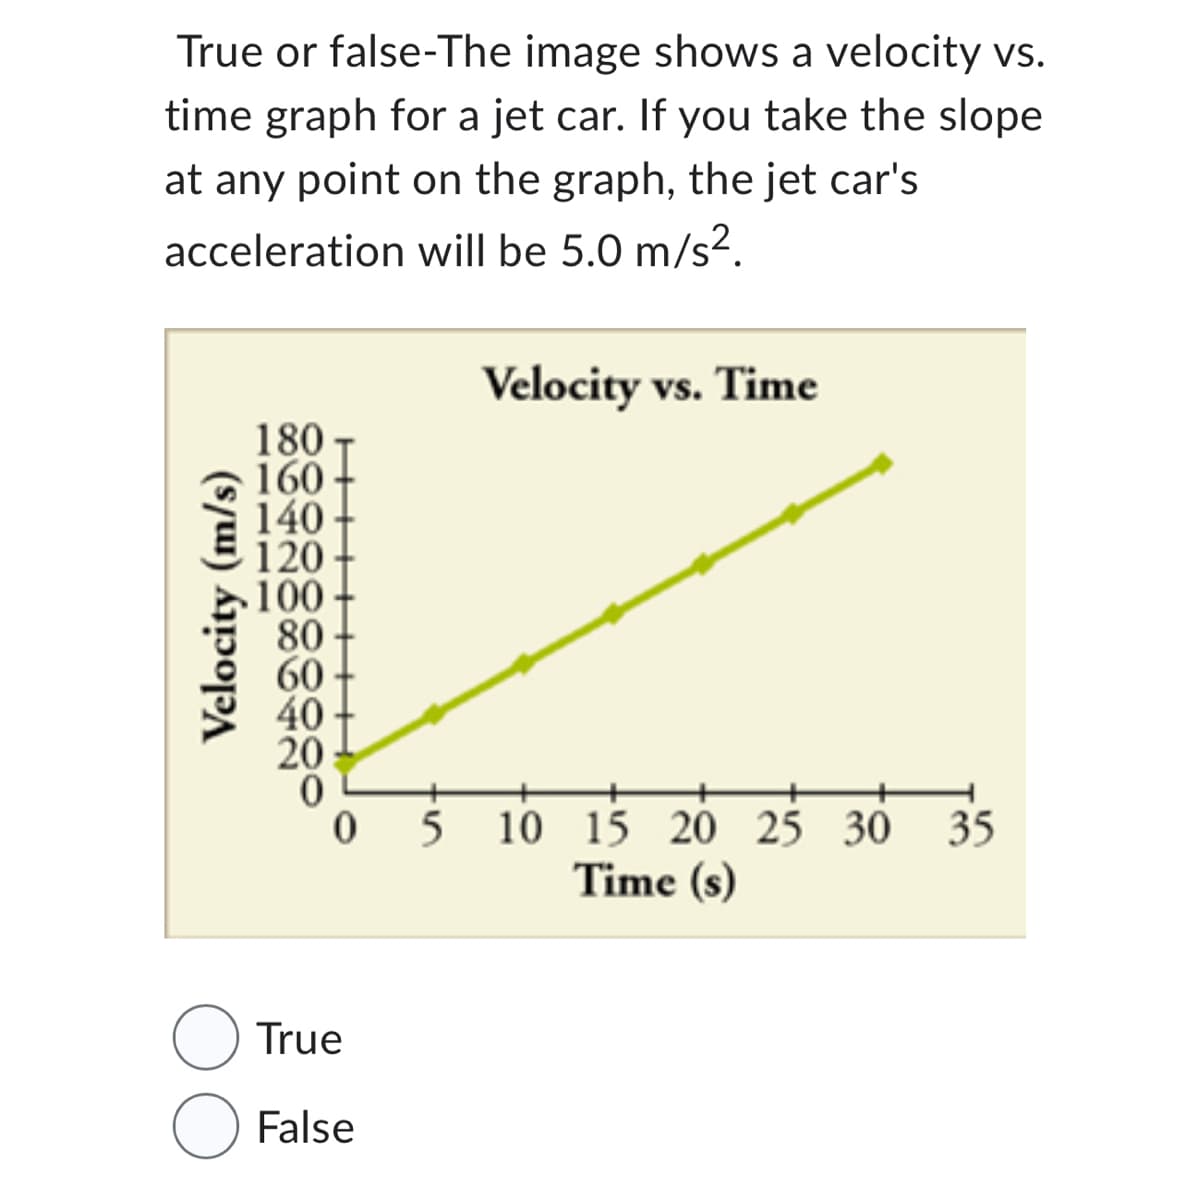 True or false-The image shows a velocity vs.
time graph for a jet car. If you take the slope
at any point on the graph, the jet car's
acceleration will be 5.0 m/s².
Velocity (m/s)
180
160
140
120
100
80
60
40
20
0
True
O False
Velocity vs. Time
5 10 15 20 25 30
Time (s)
35